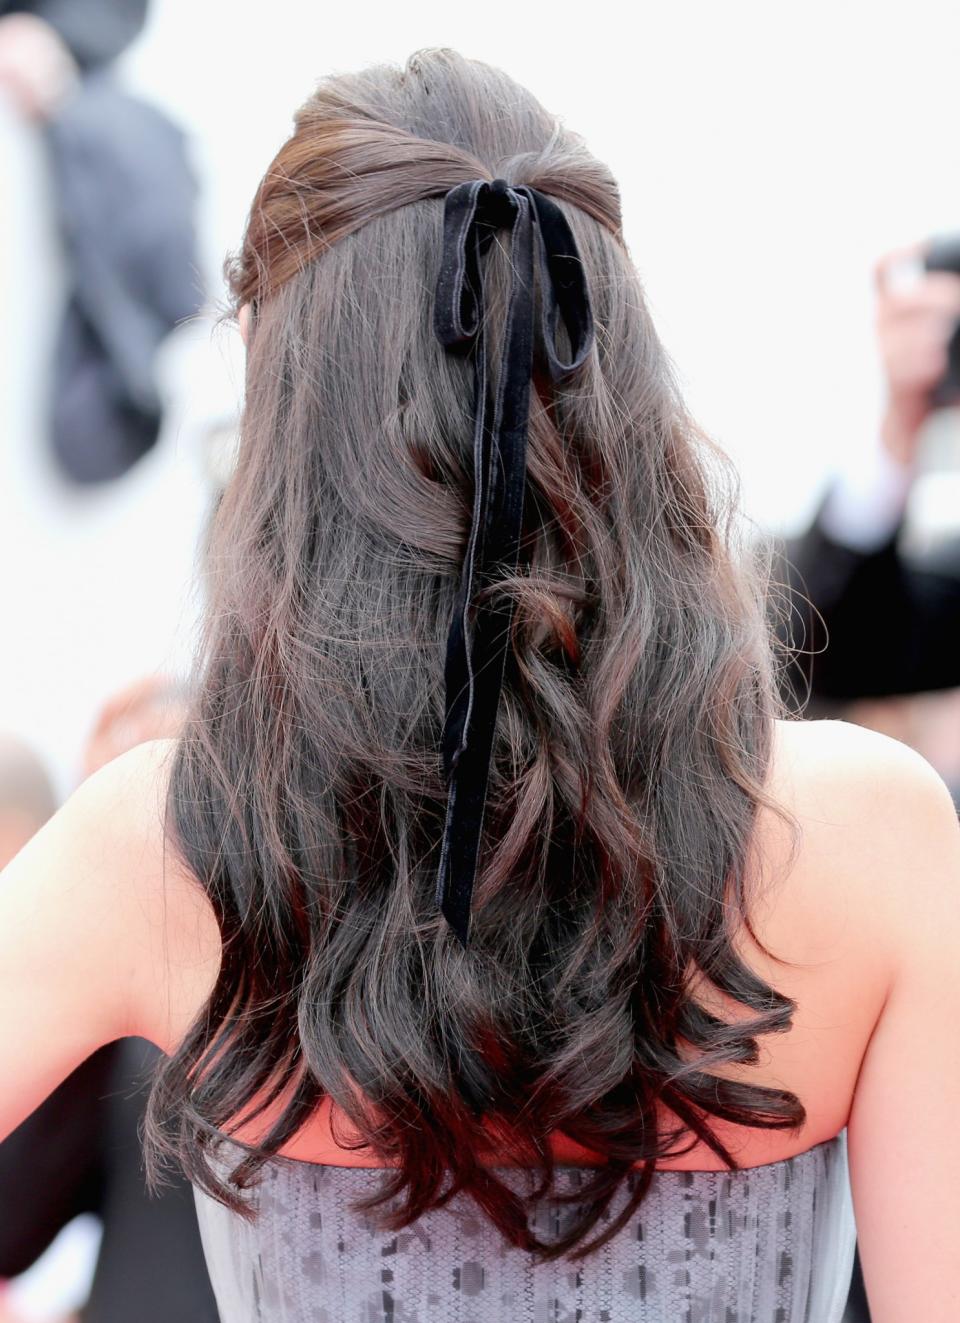 Half-up, half-down prom hairstyles: Put a bow on it